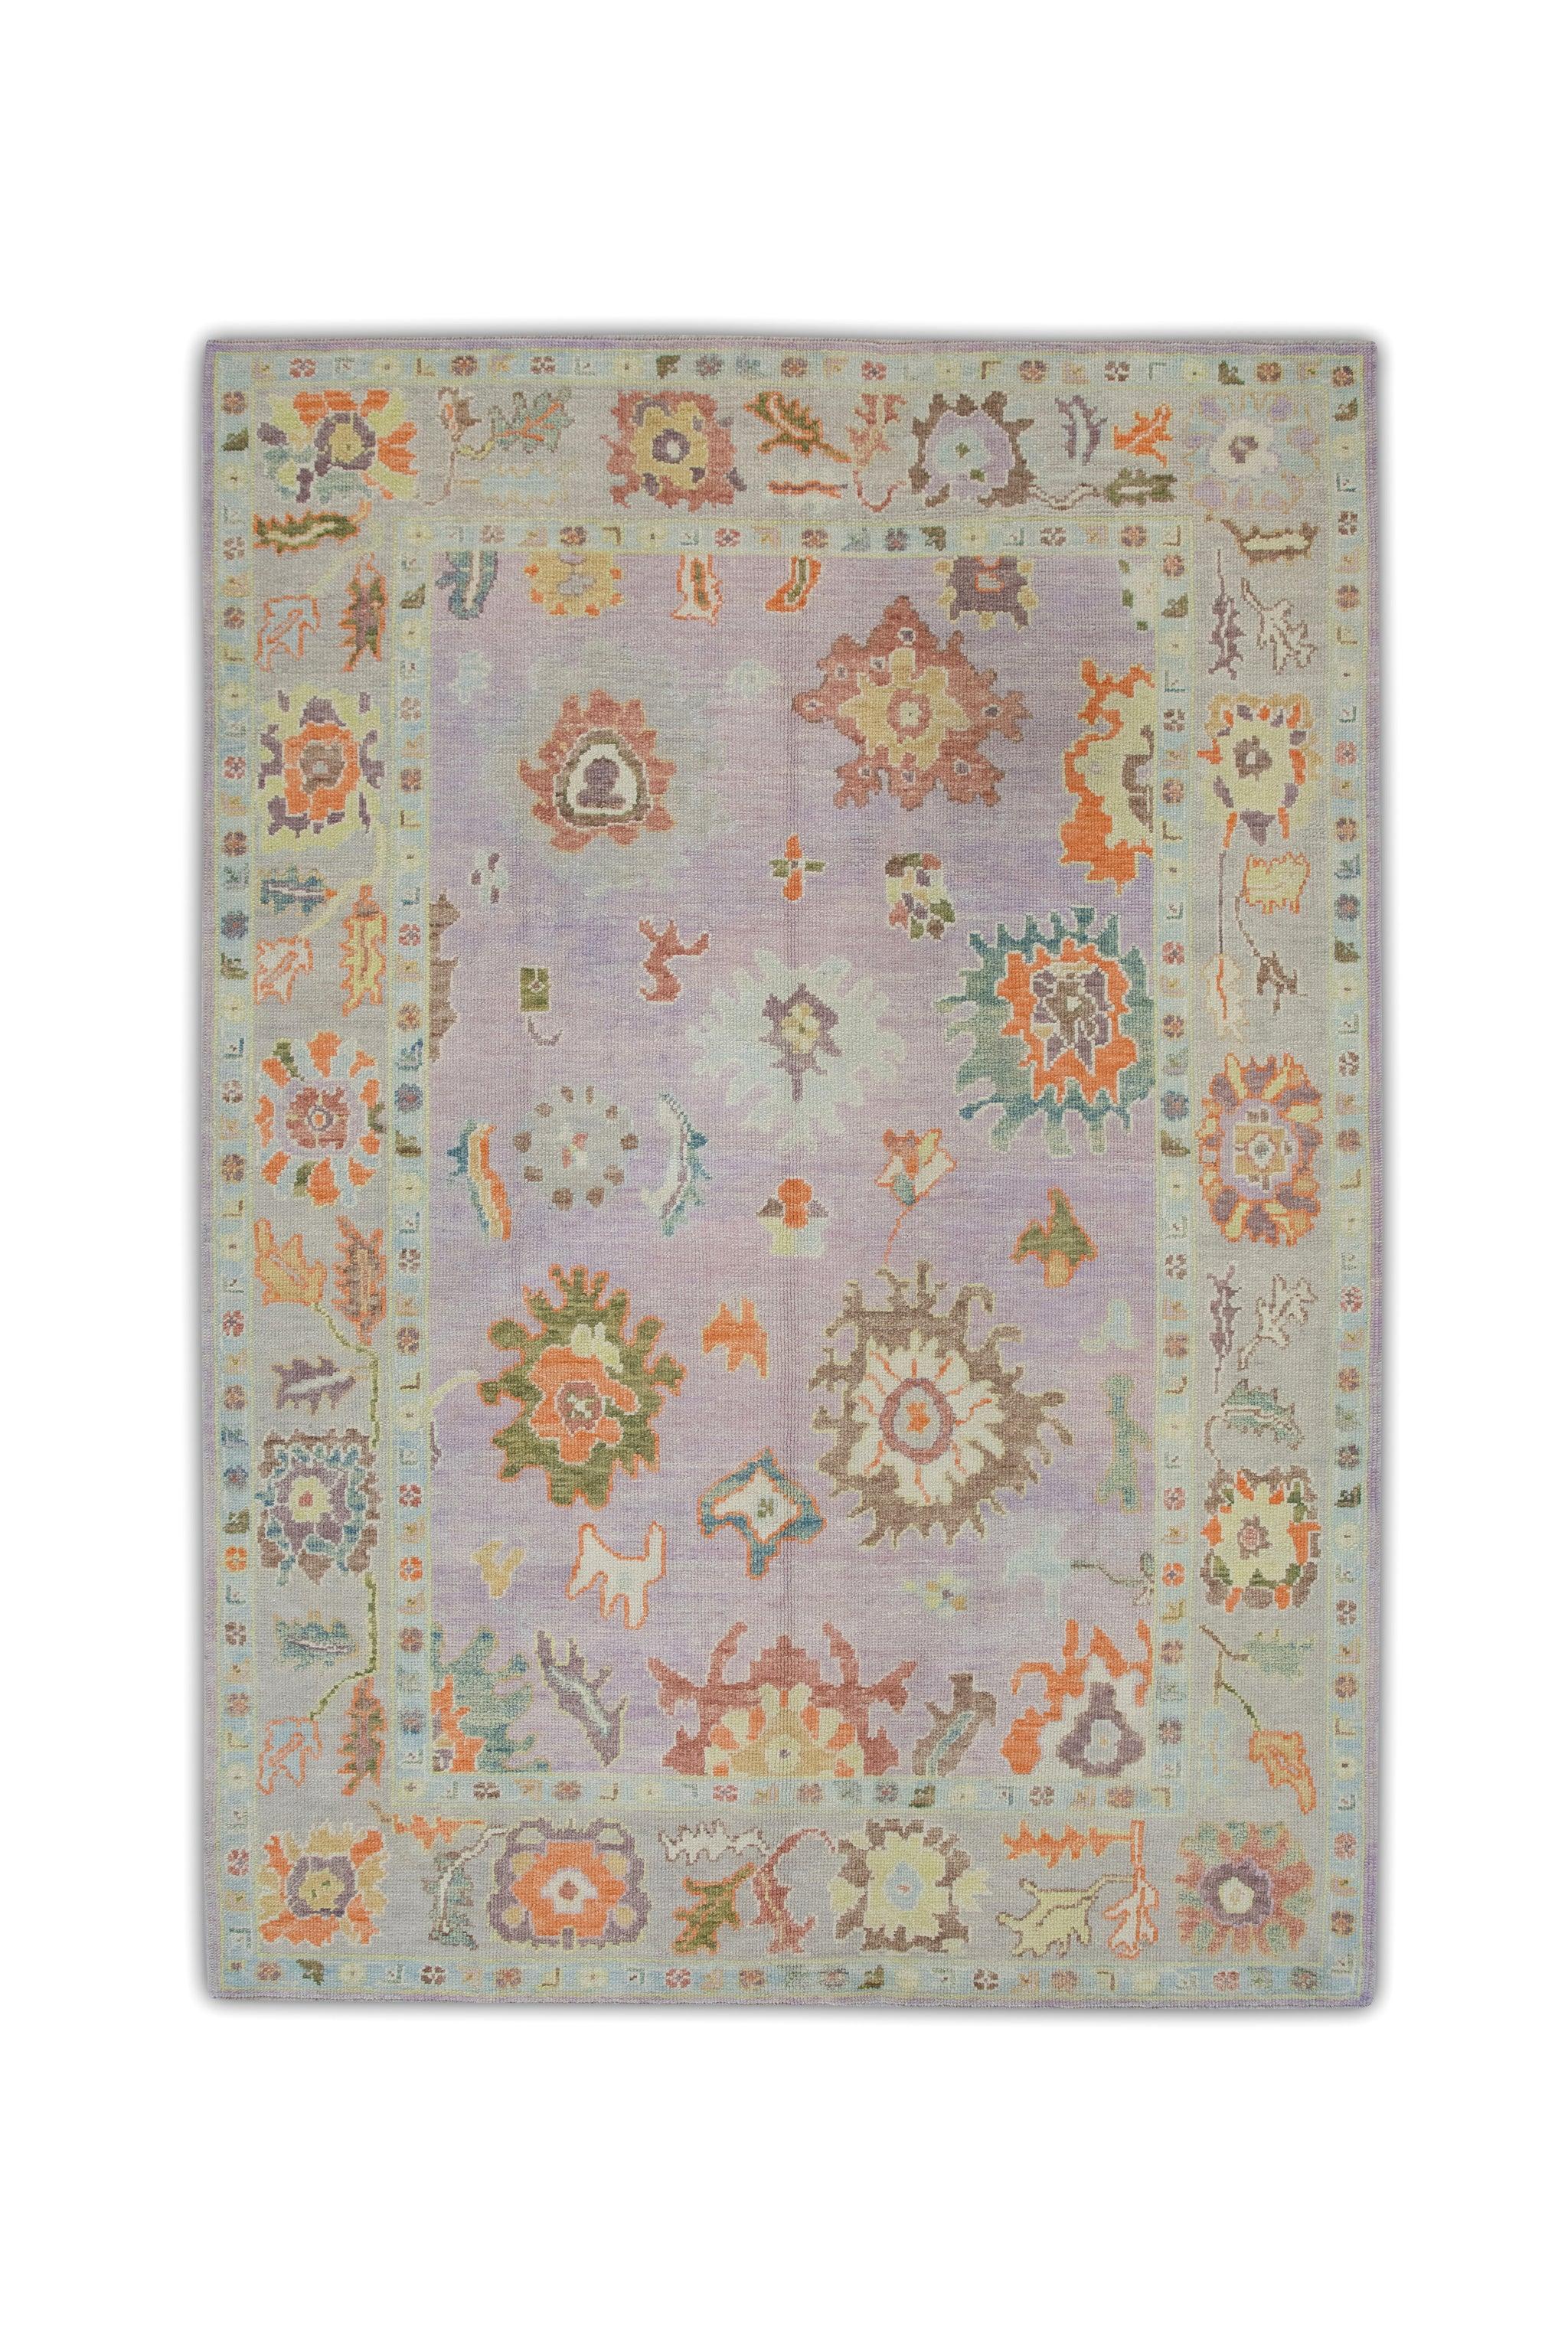 Contemporary Pink and Orange Floral Design Handwoven Wool Turkish Oushak Rug 6'2